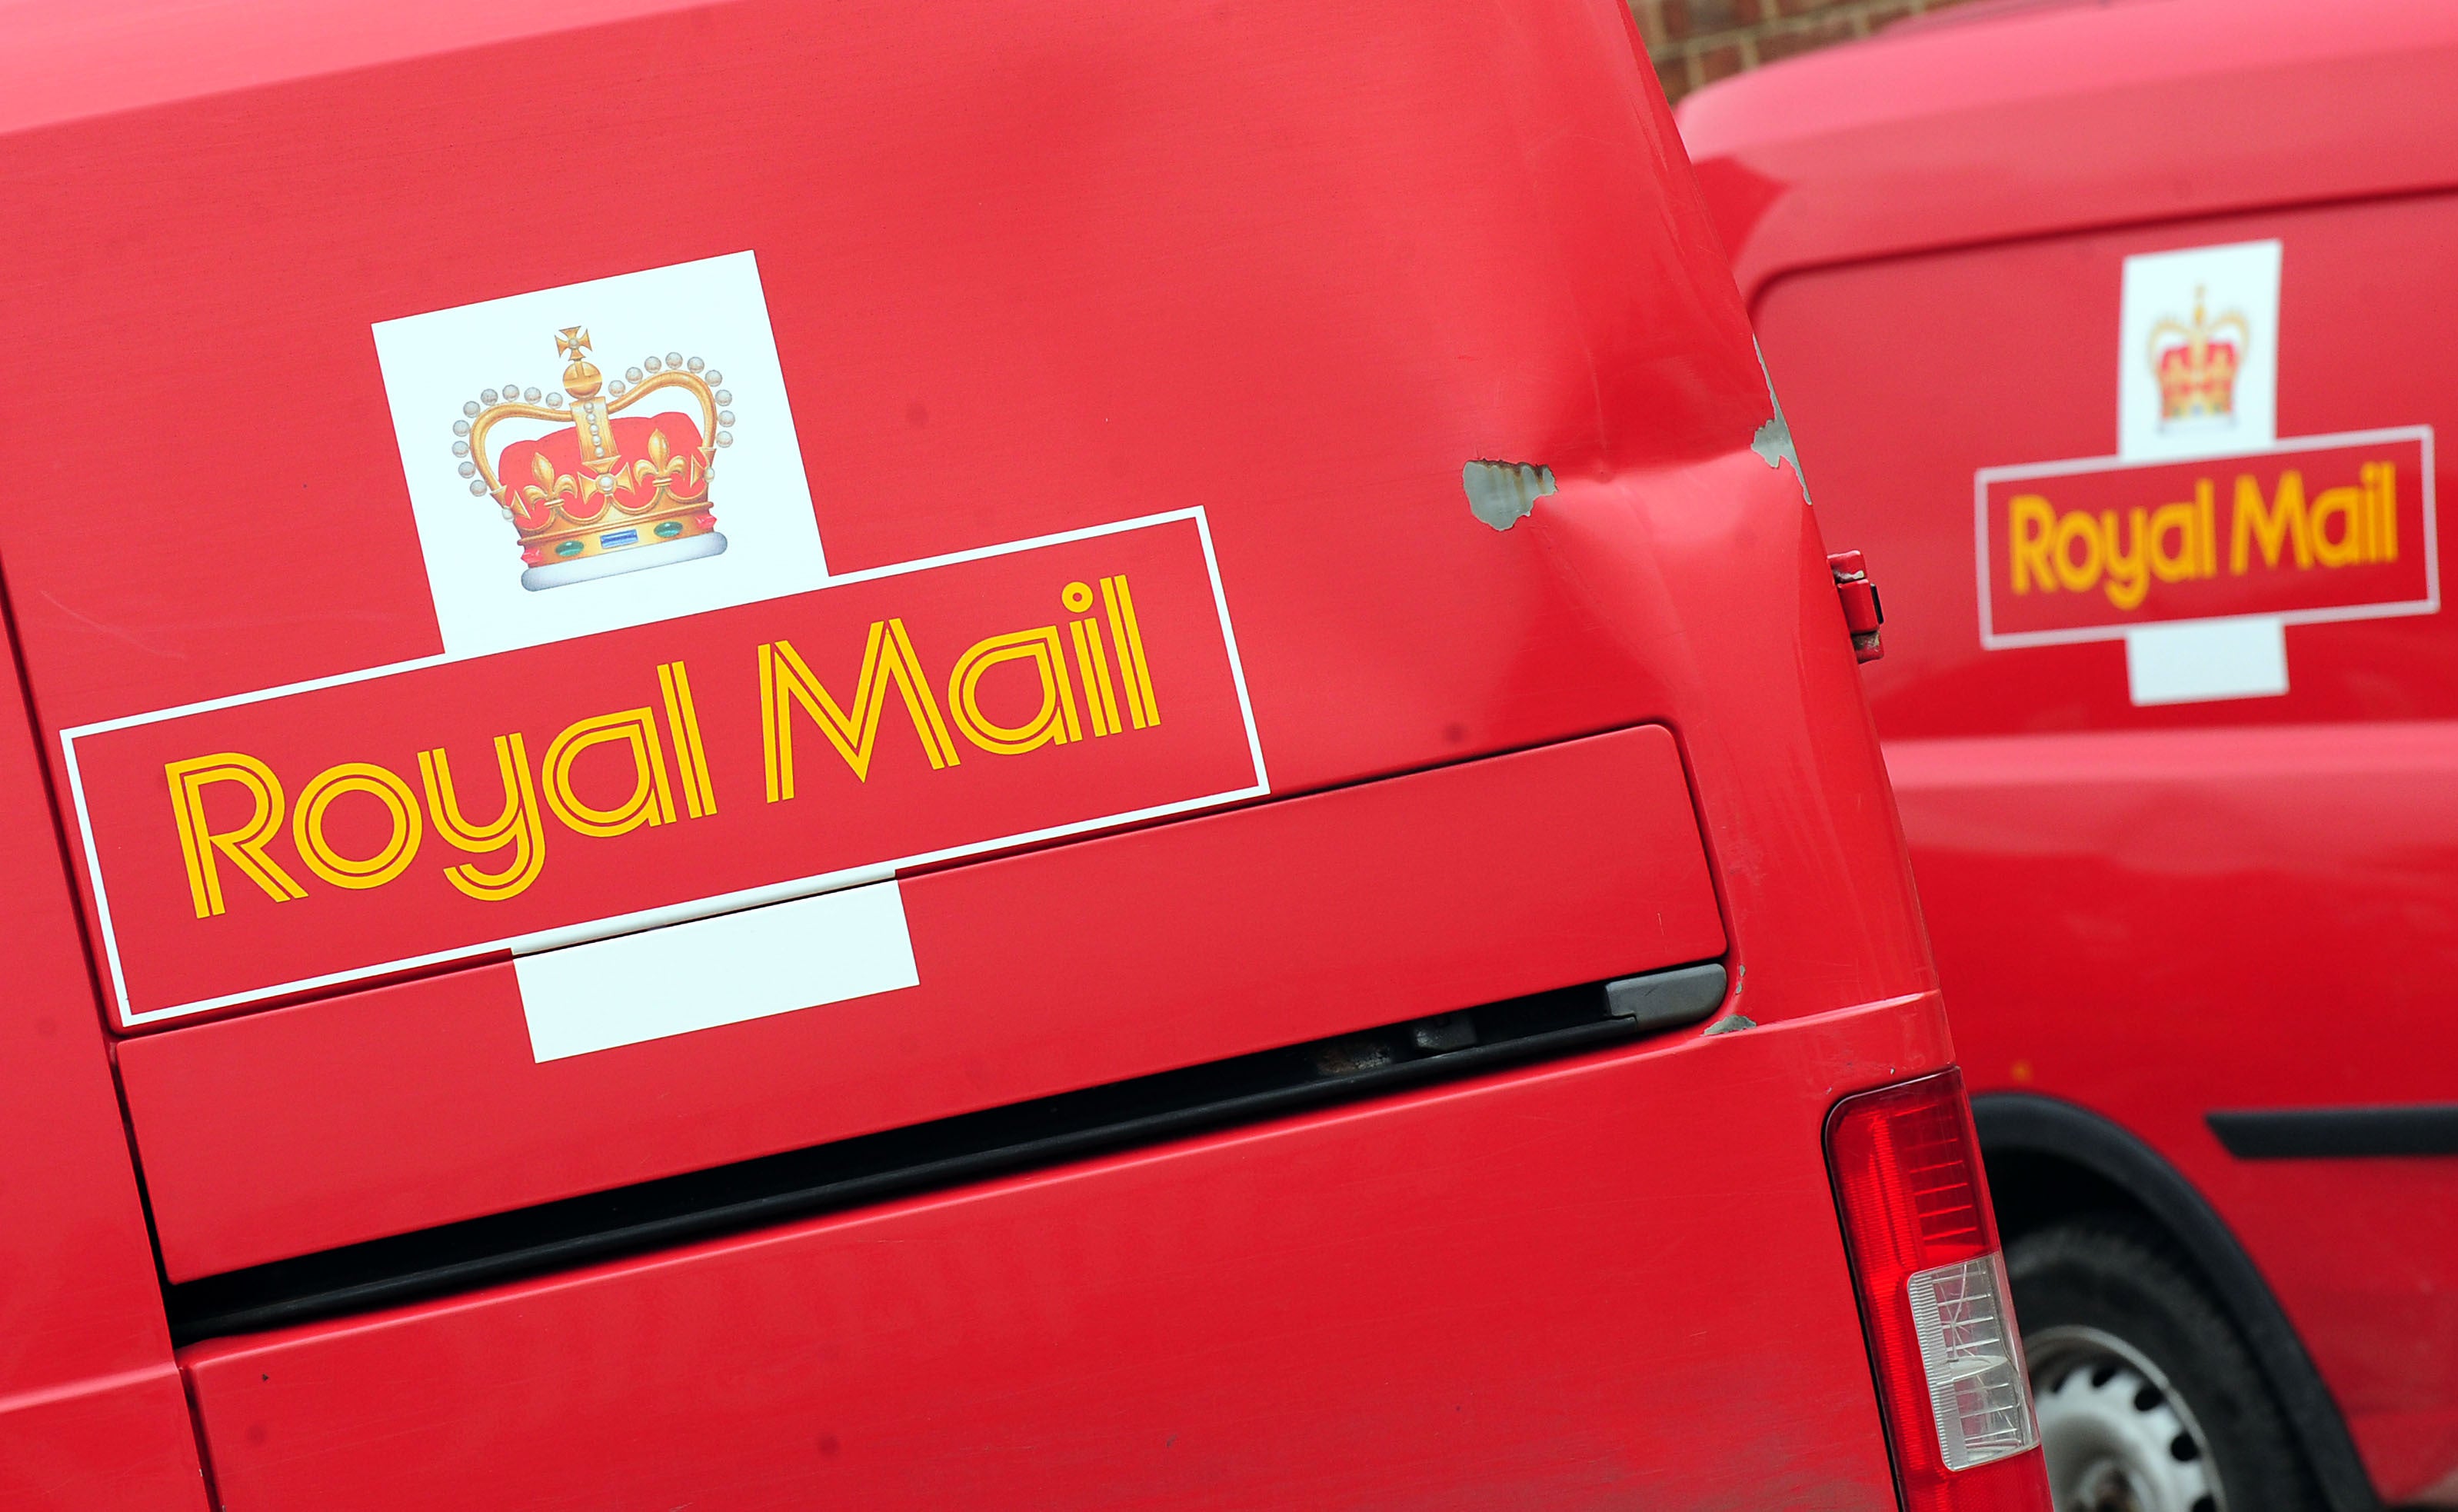 All Royal Mail collections and deliveries will be shut down during four days of strike action, the CWU said (Rui Vera/PA)